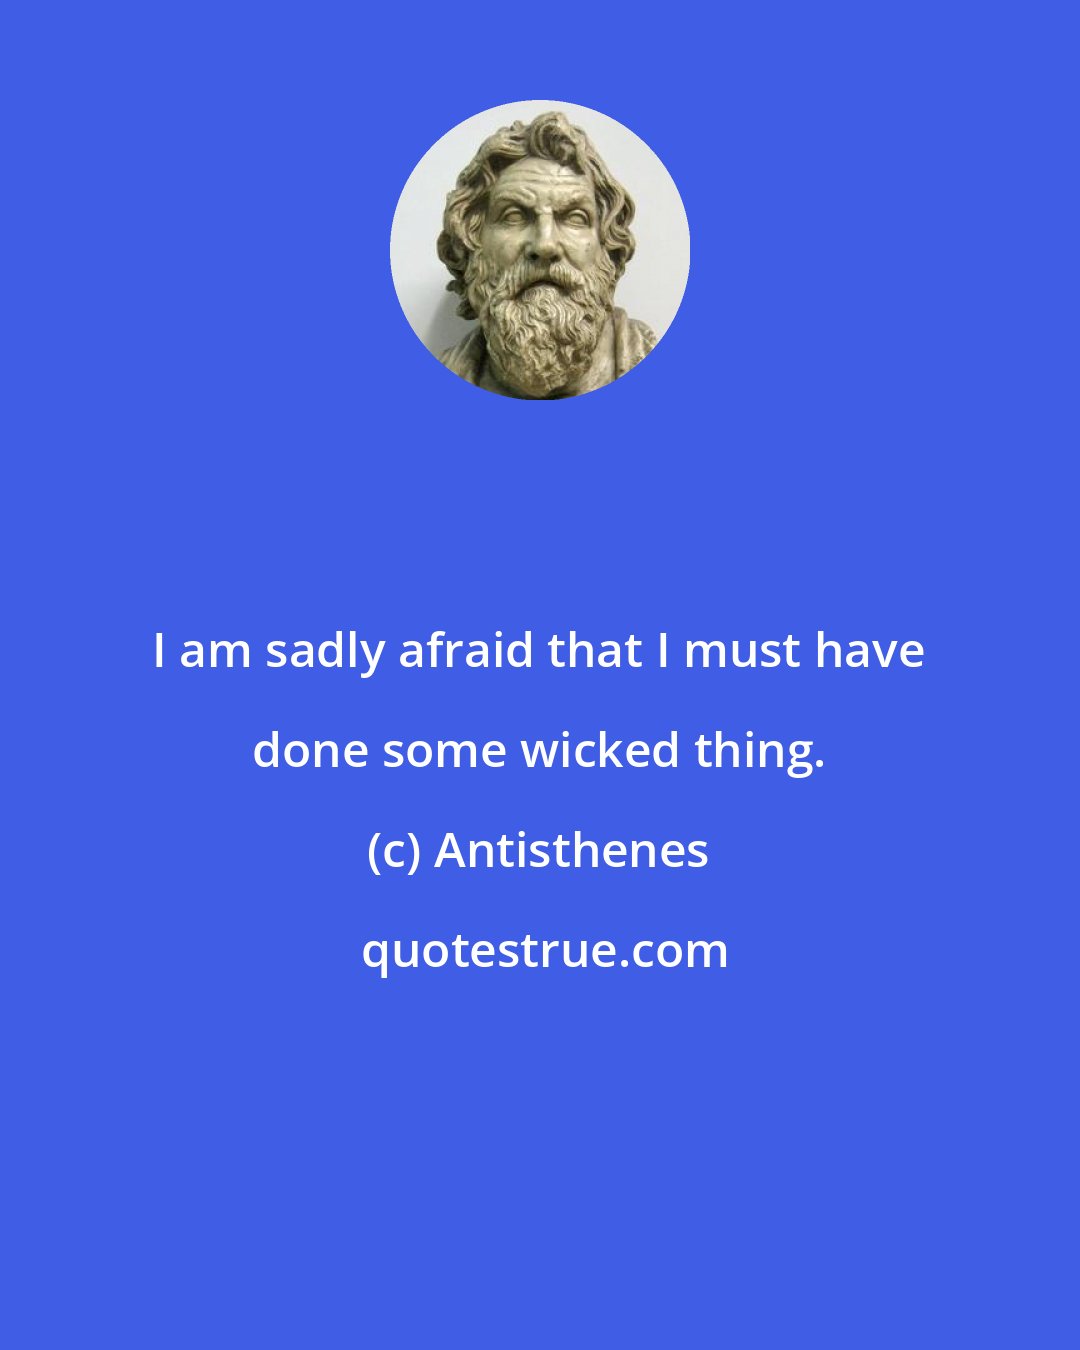 Antisthenes: I am sadly afraid that I must have done some wicked thing.